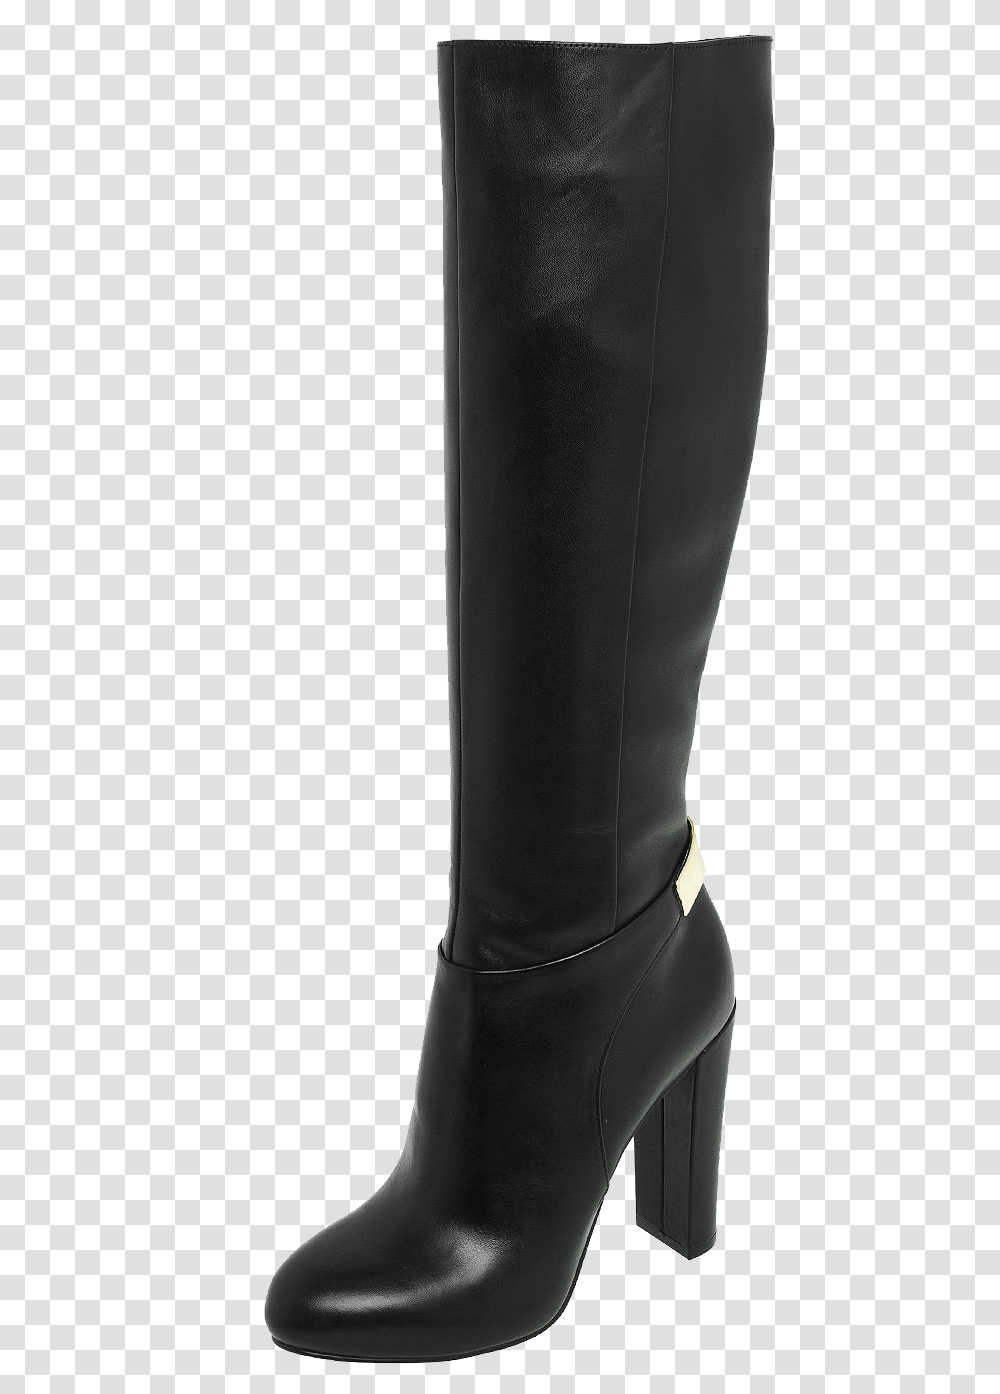 Black Women Boots Image High Heel Boots Background, Apparel, Riding Boot, Footwear Transparent Png